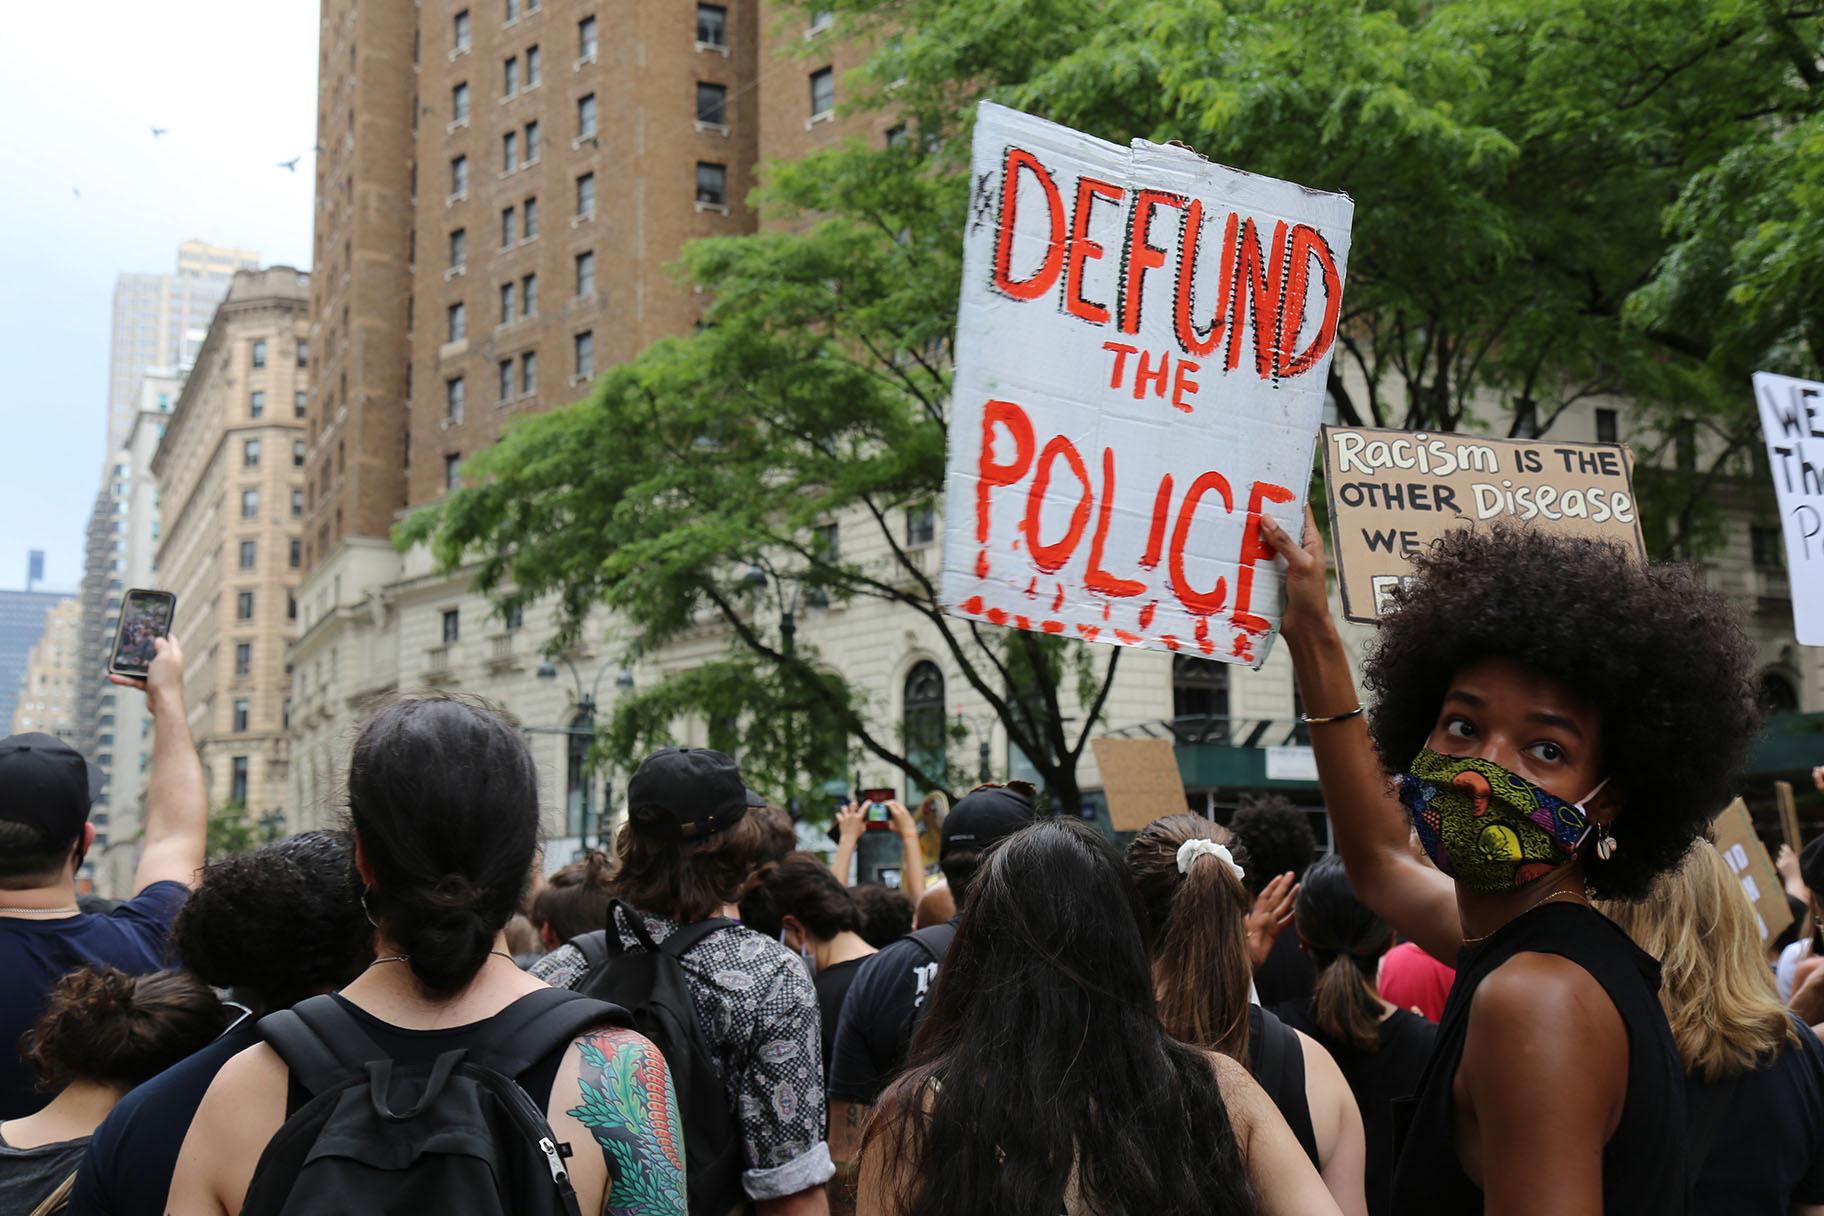 Protesters march Saturday, June 6, 2020, in New York. Demonstrations continue across the United States in protest of racism and police brutality, sparked by the May 25 death of George Floyd in police custody in Minneapolis. (AP Photo / Ragan Clark)